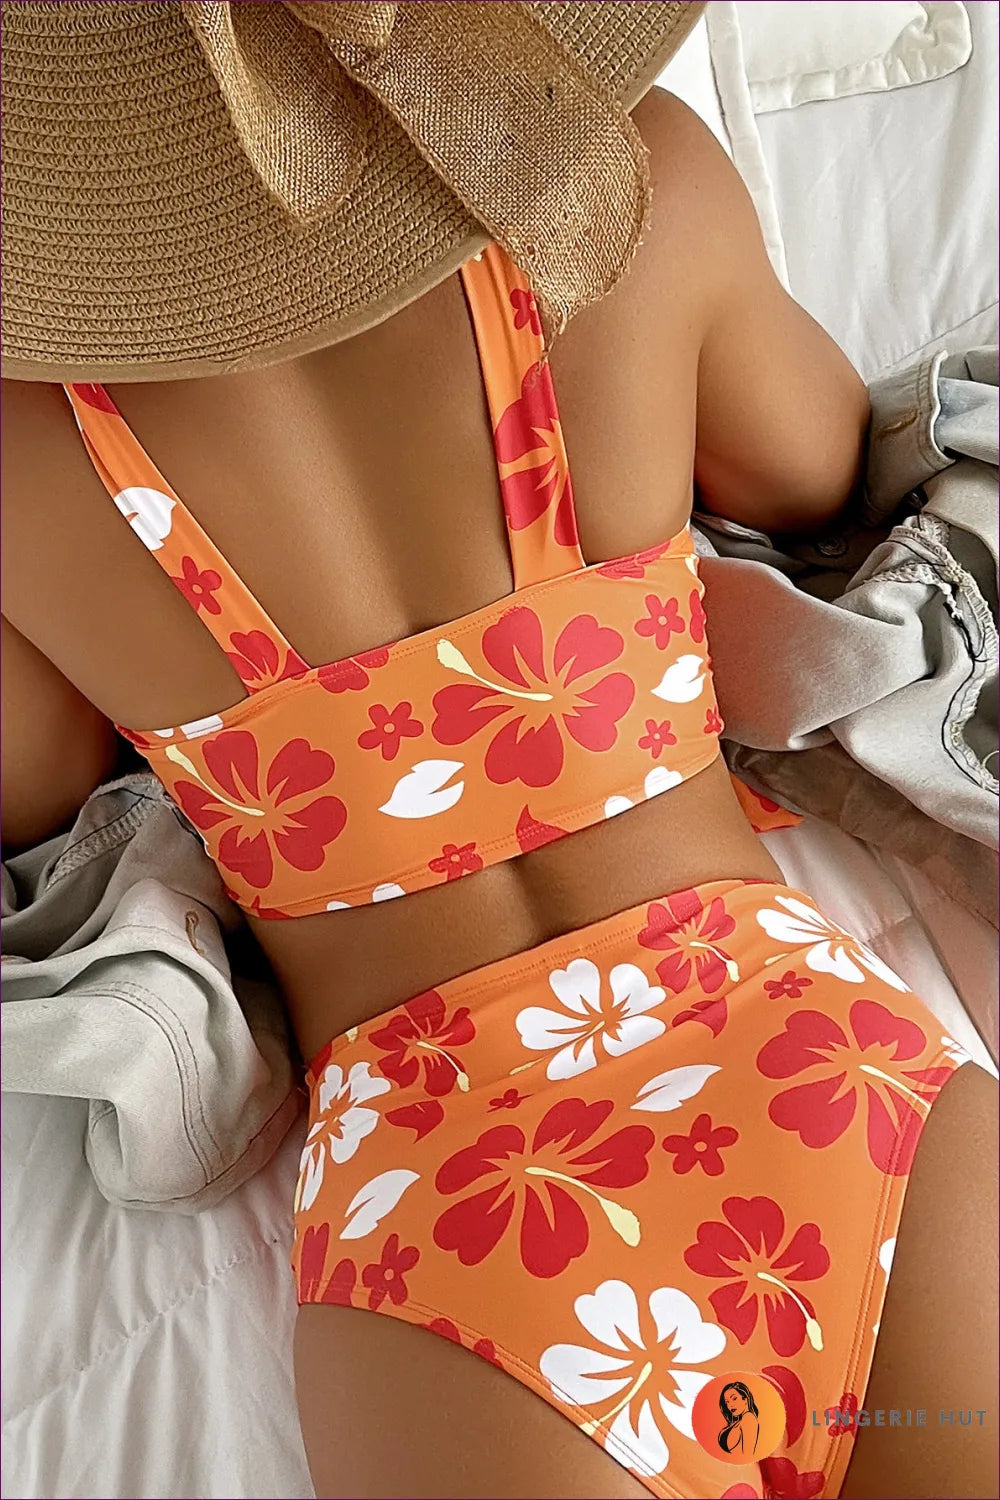 Turn Heads With Our Seductive Lace Print Backless High-waist Sexy Bikini. Perfect For Showcasing Your